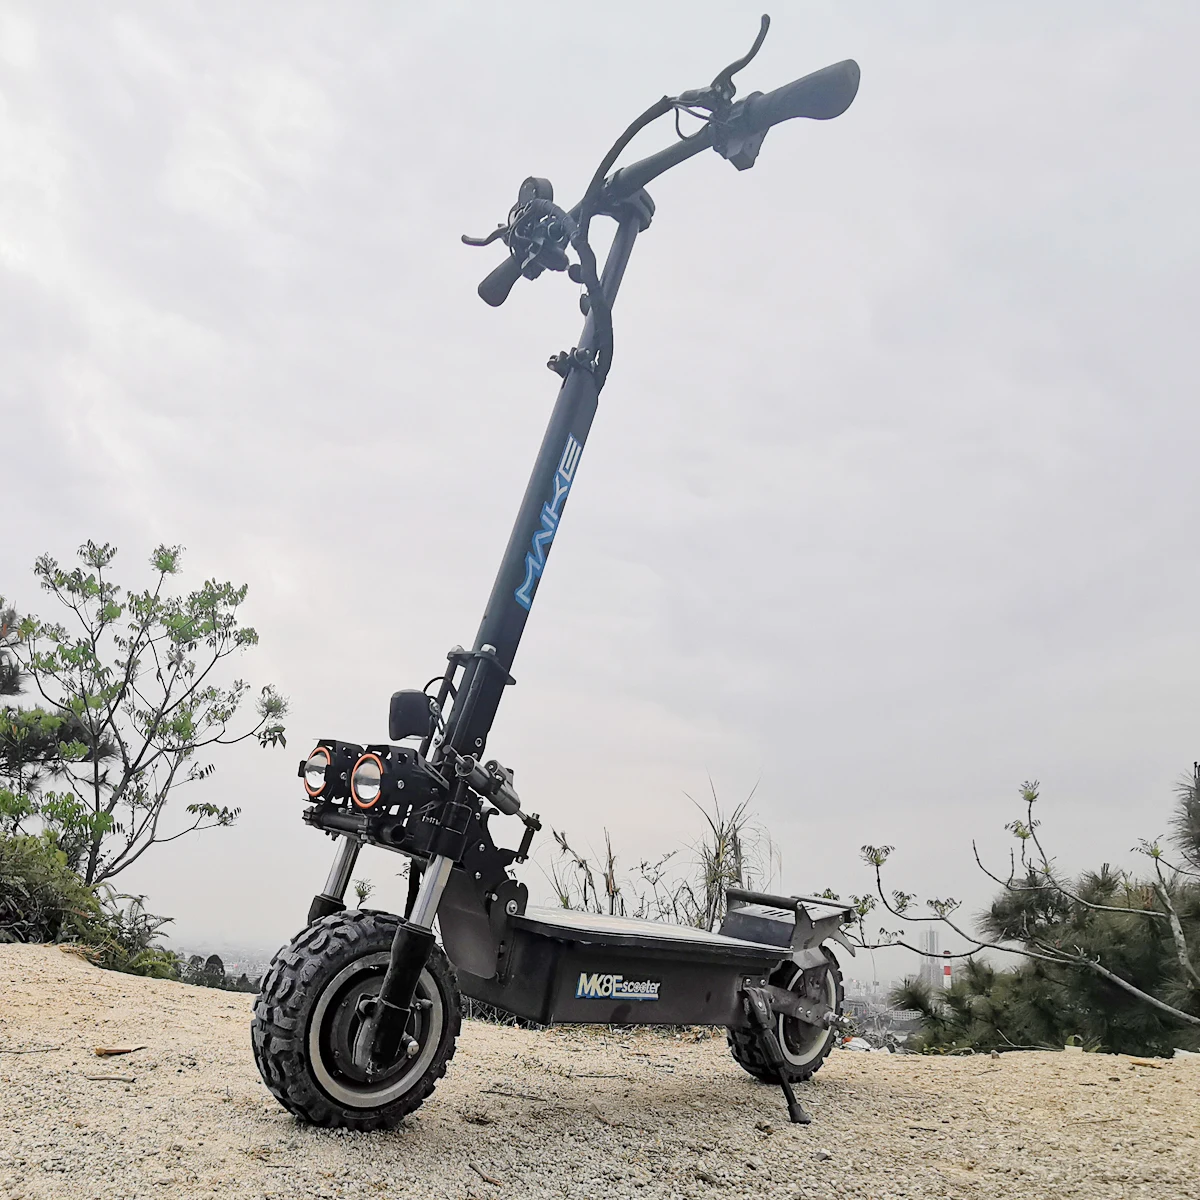 

Maike MK8 2500W*2 Powerful foldable off road 5000W monopattino dual motor adults electric dualtron scooter